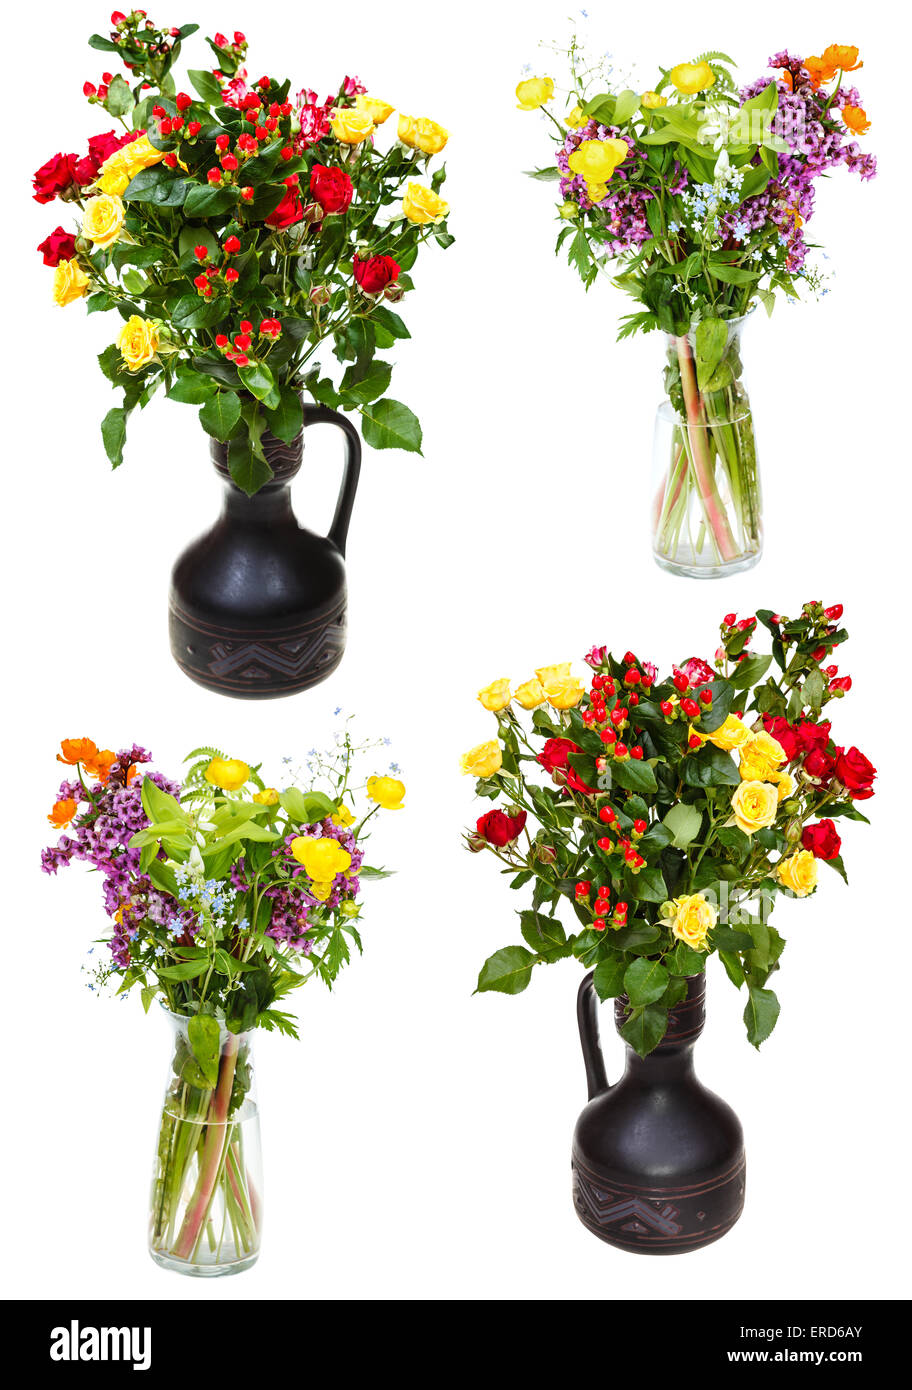 set of bunches of flowers in jugs on white background Stock Photo